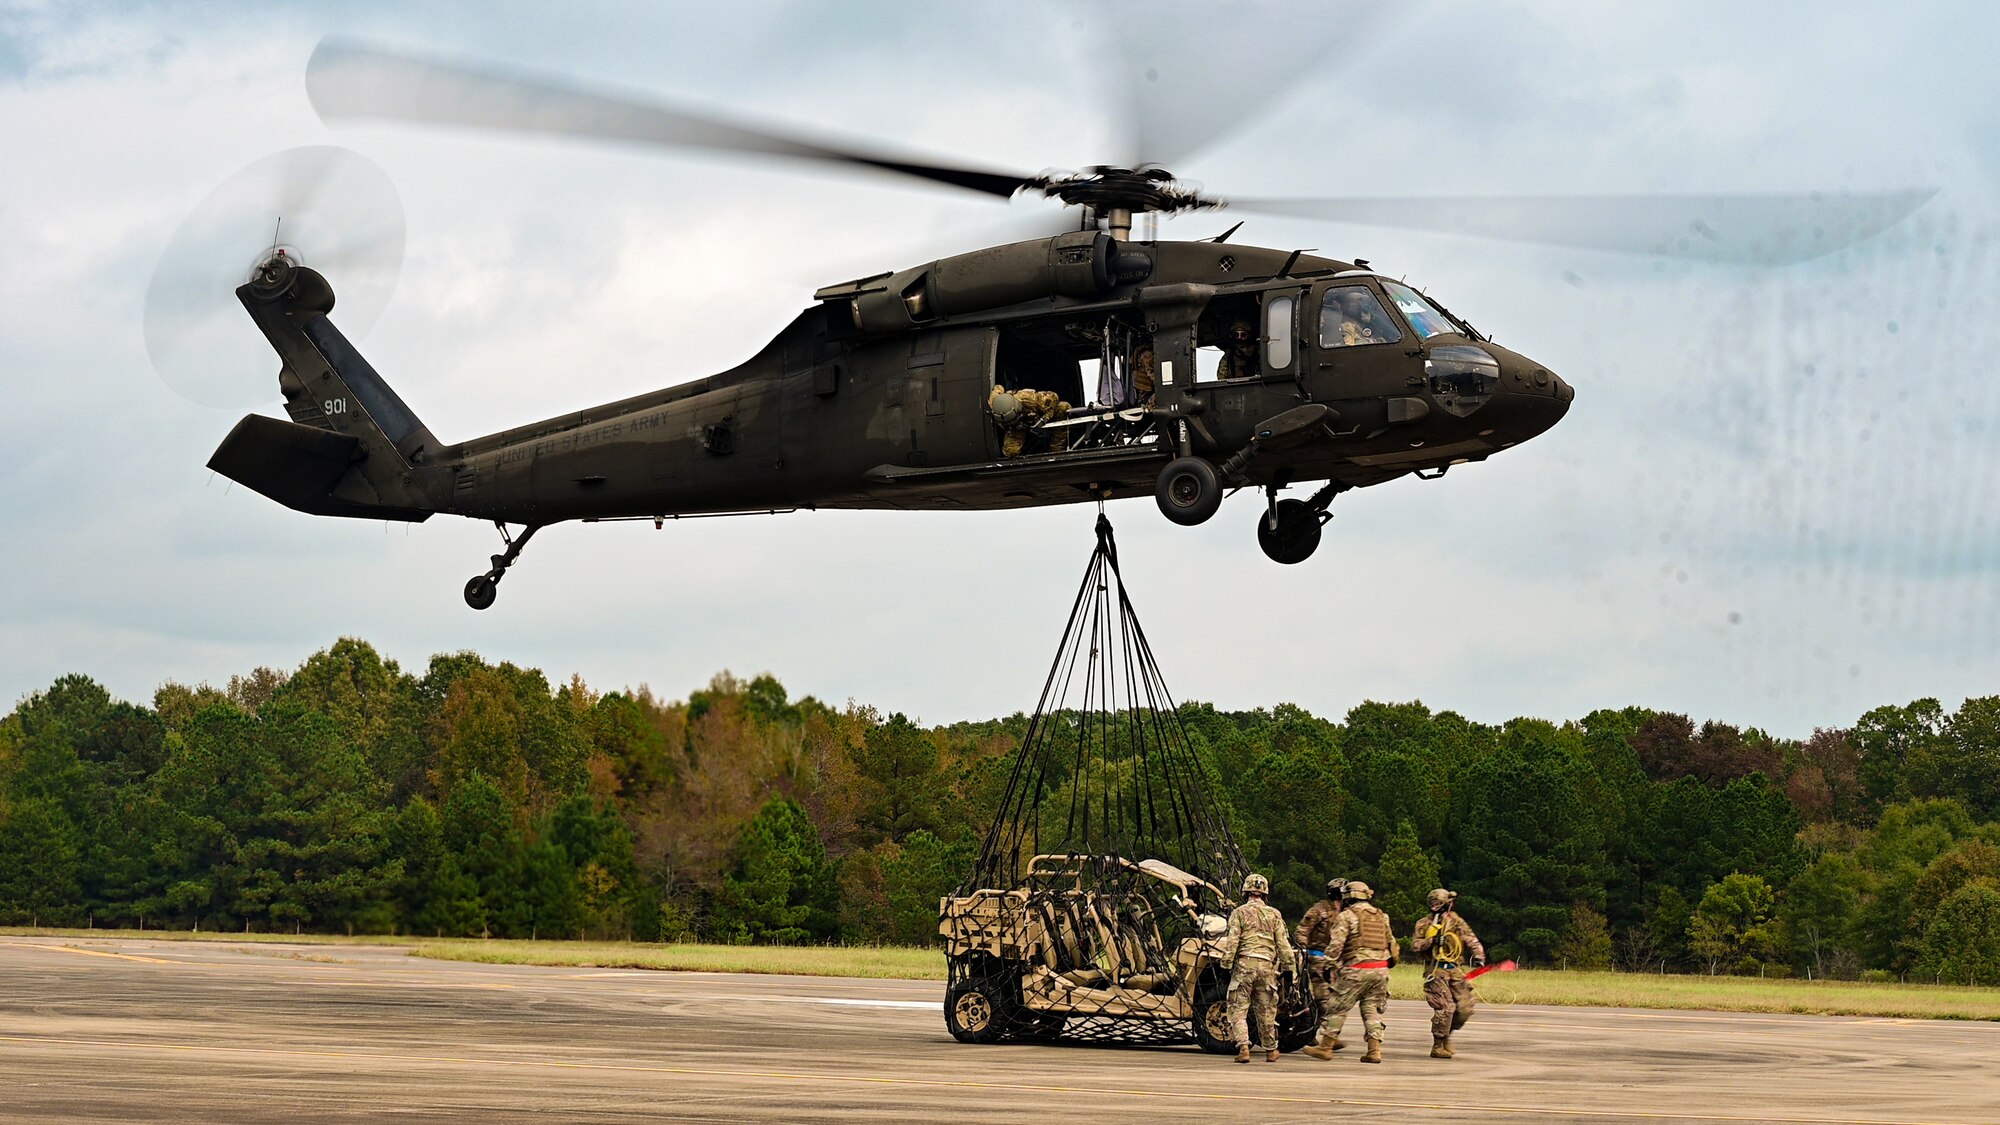 An off-road vehicle is attached to a helicopter for transport.